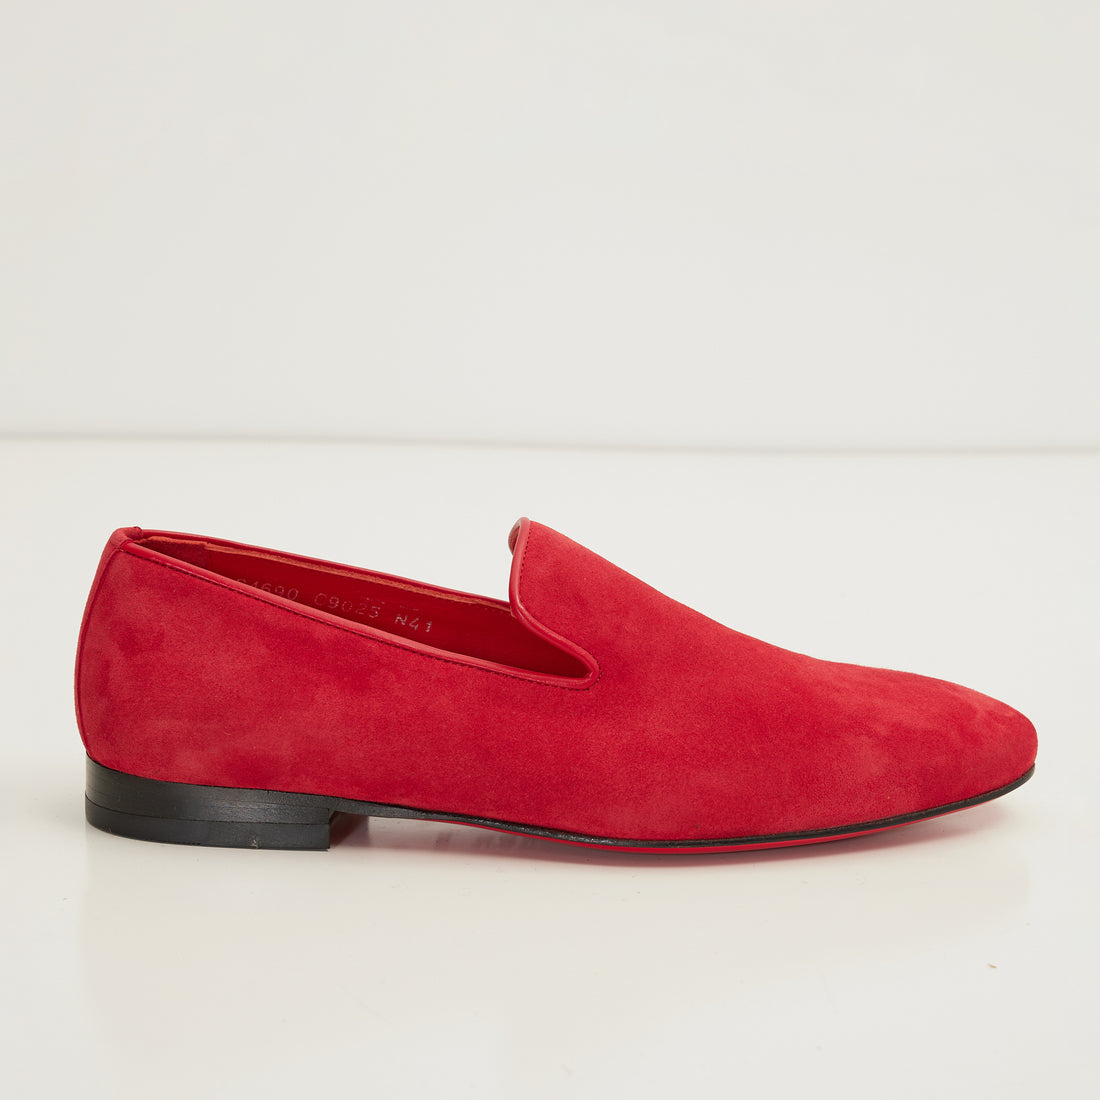 N° C9016 THE FORMAL LEATHER LOAFER - RED SUEDE